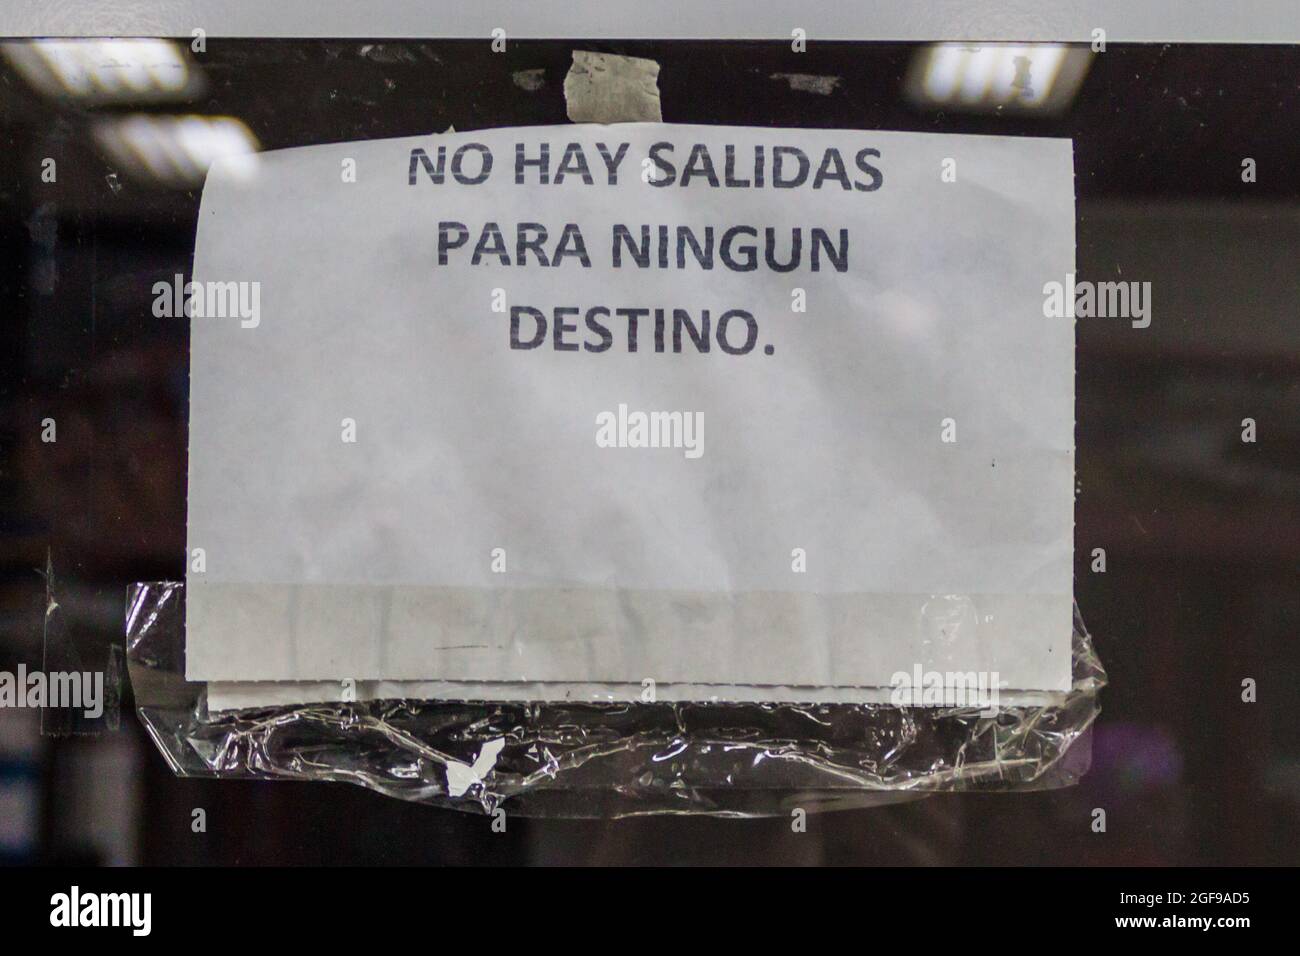 MERIDA, VENEZUELA - AUGUST 20, 2015: Sign on a bus office in Merida says: There are no departures, to no destination. This is causes by severe lack of Stock Photo